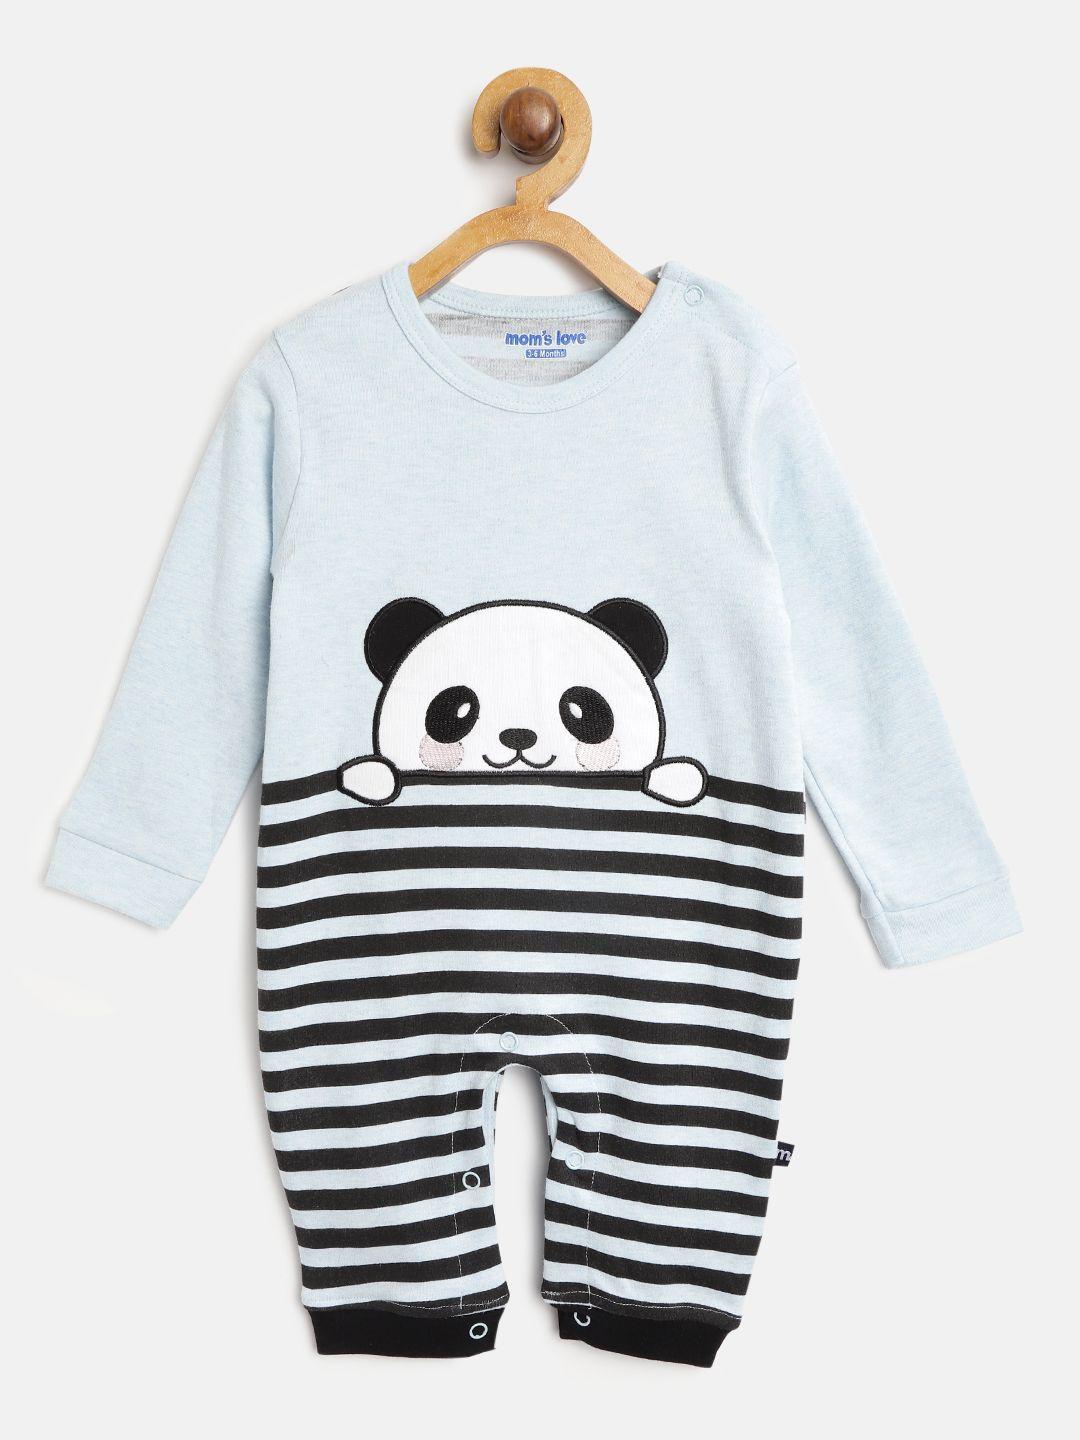 moms-love-boys-blue-&-black-striped-rompers-with-panda-applique-detail